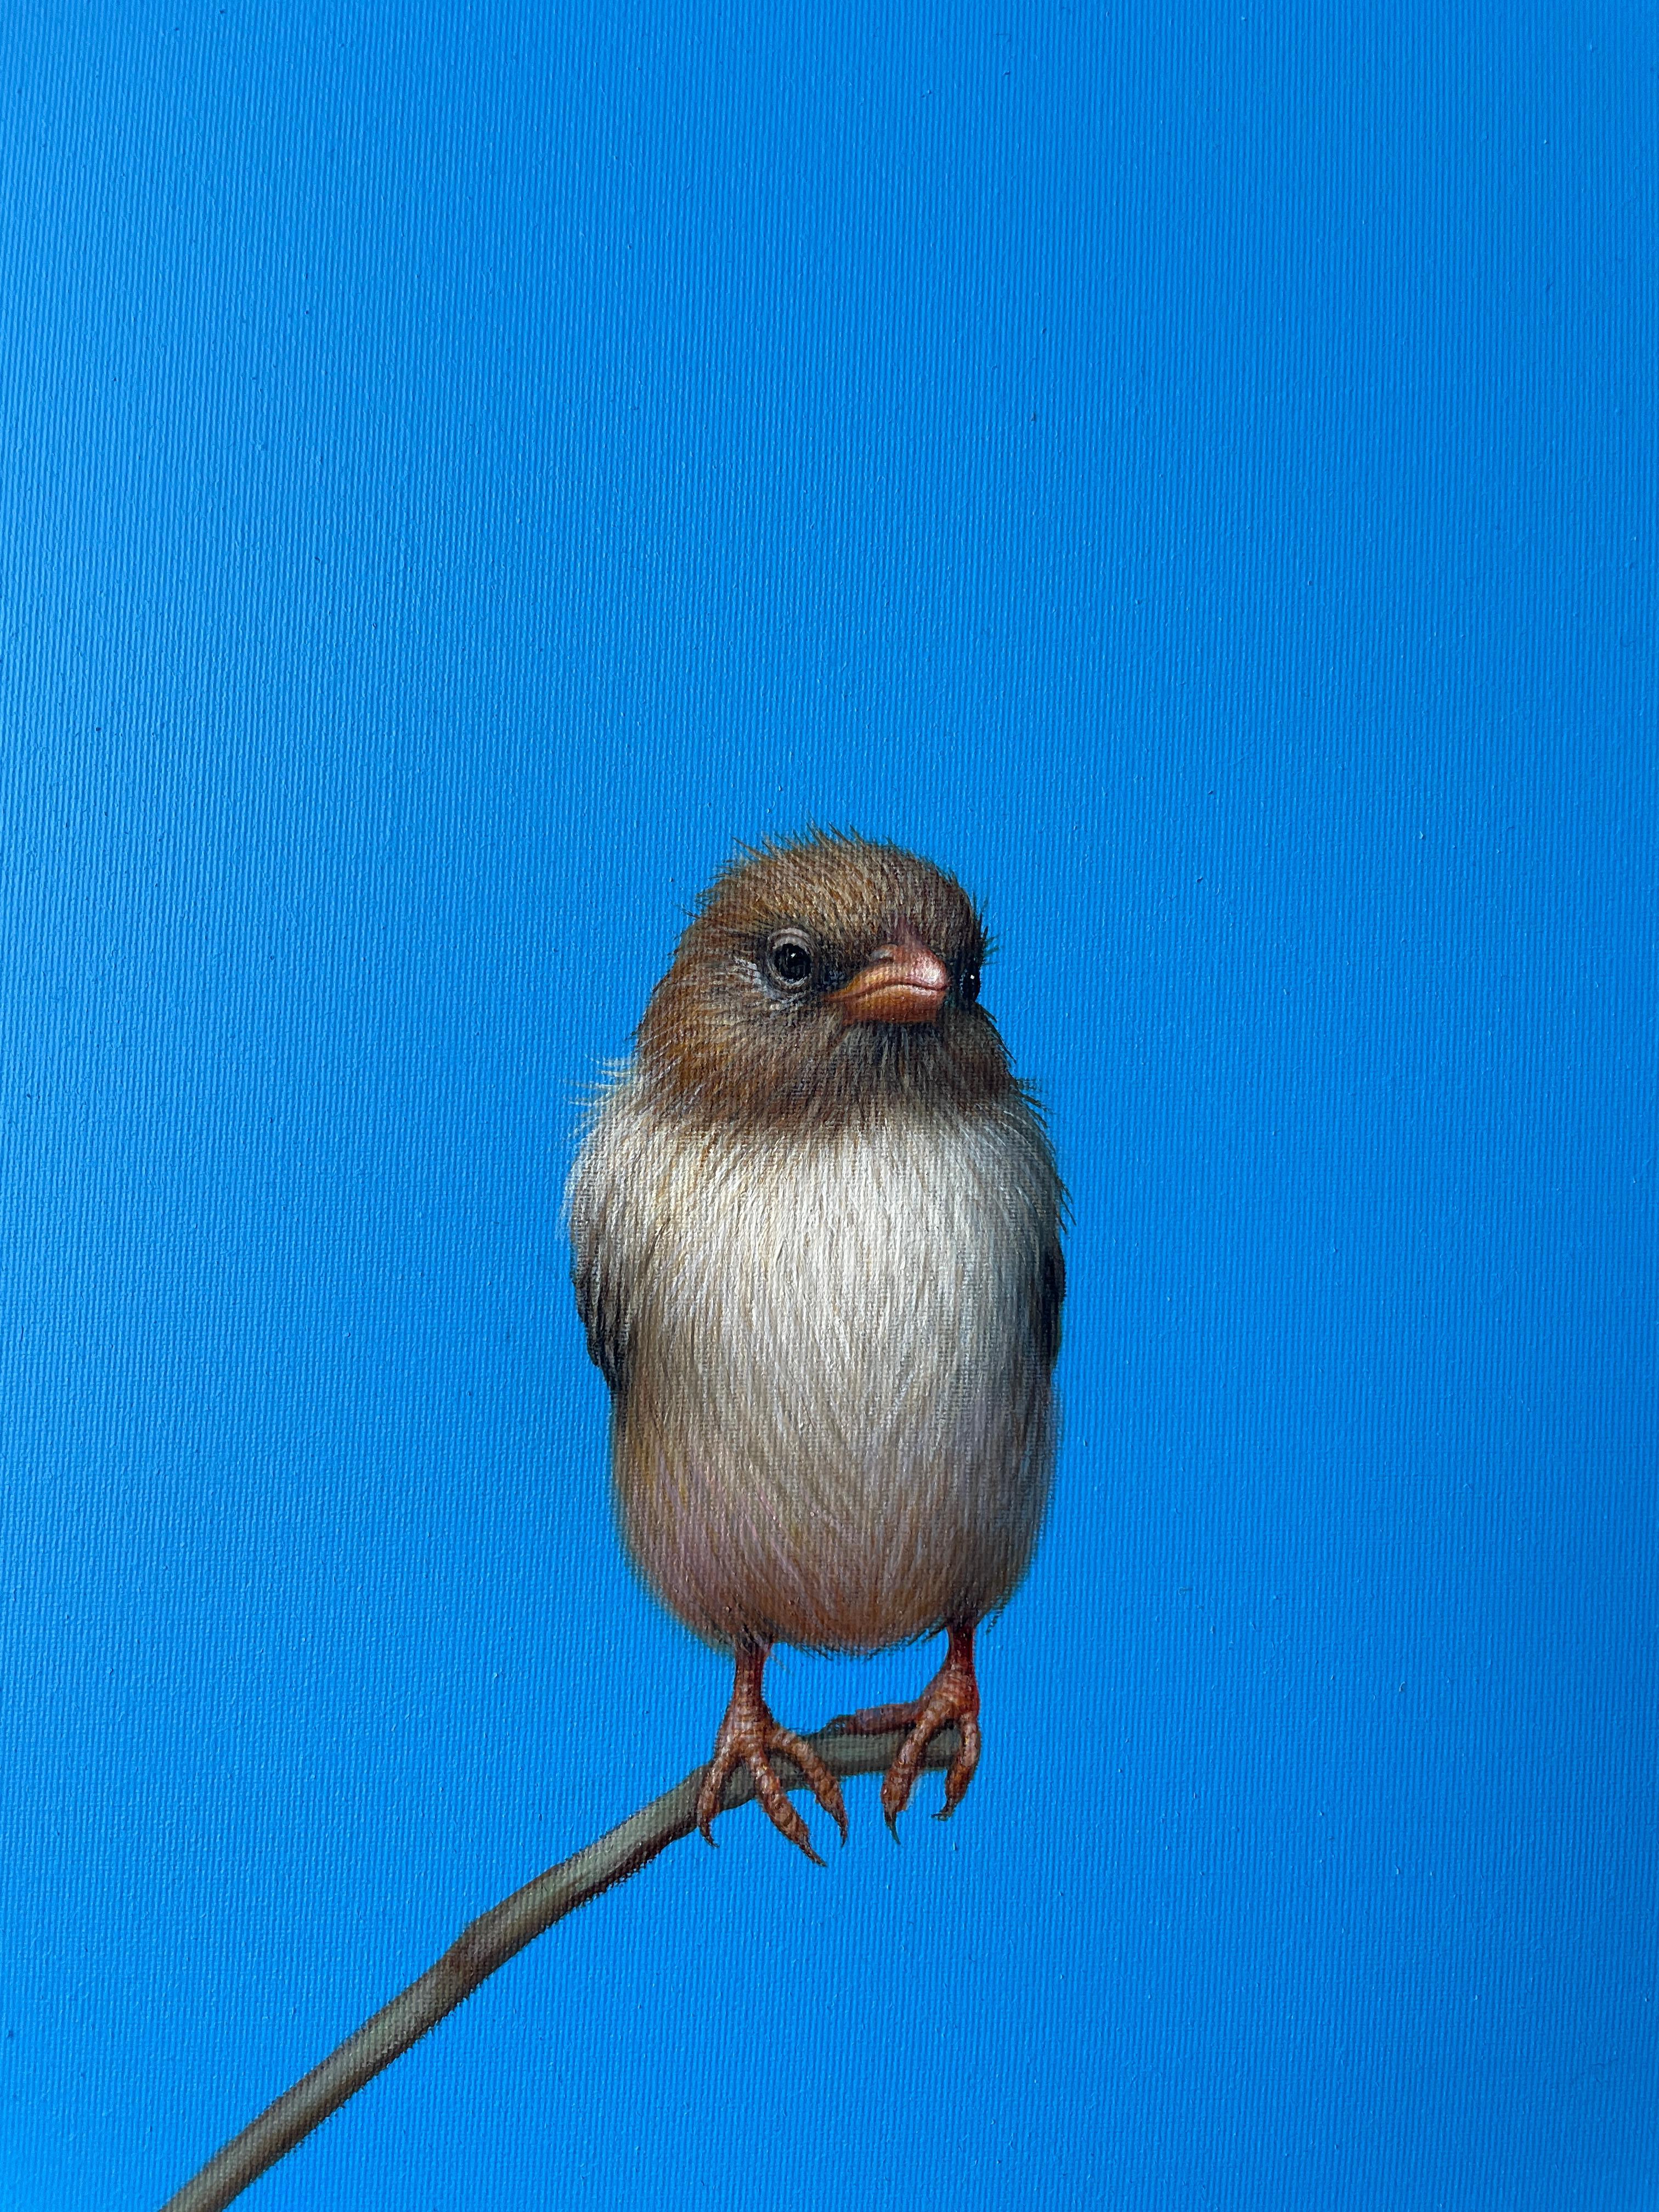 Felix - original contemporary realist bird and skyscape oil painting artwork - Painting by Lilia Mazurkevich